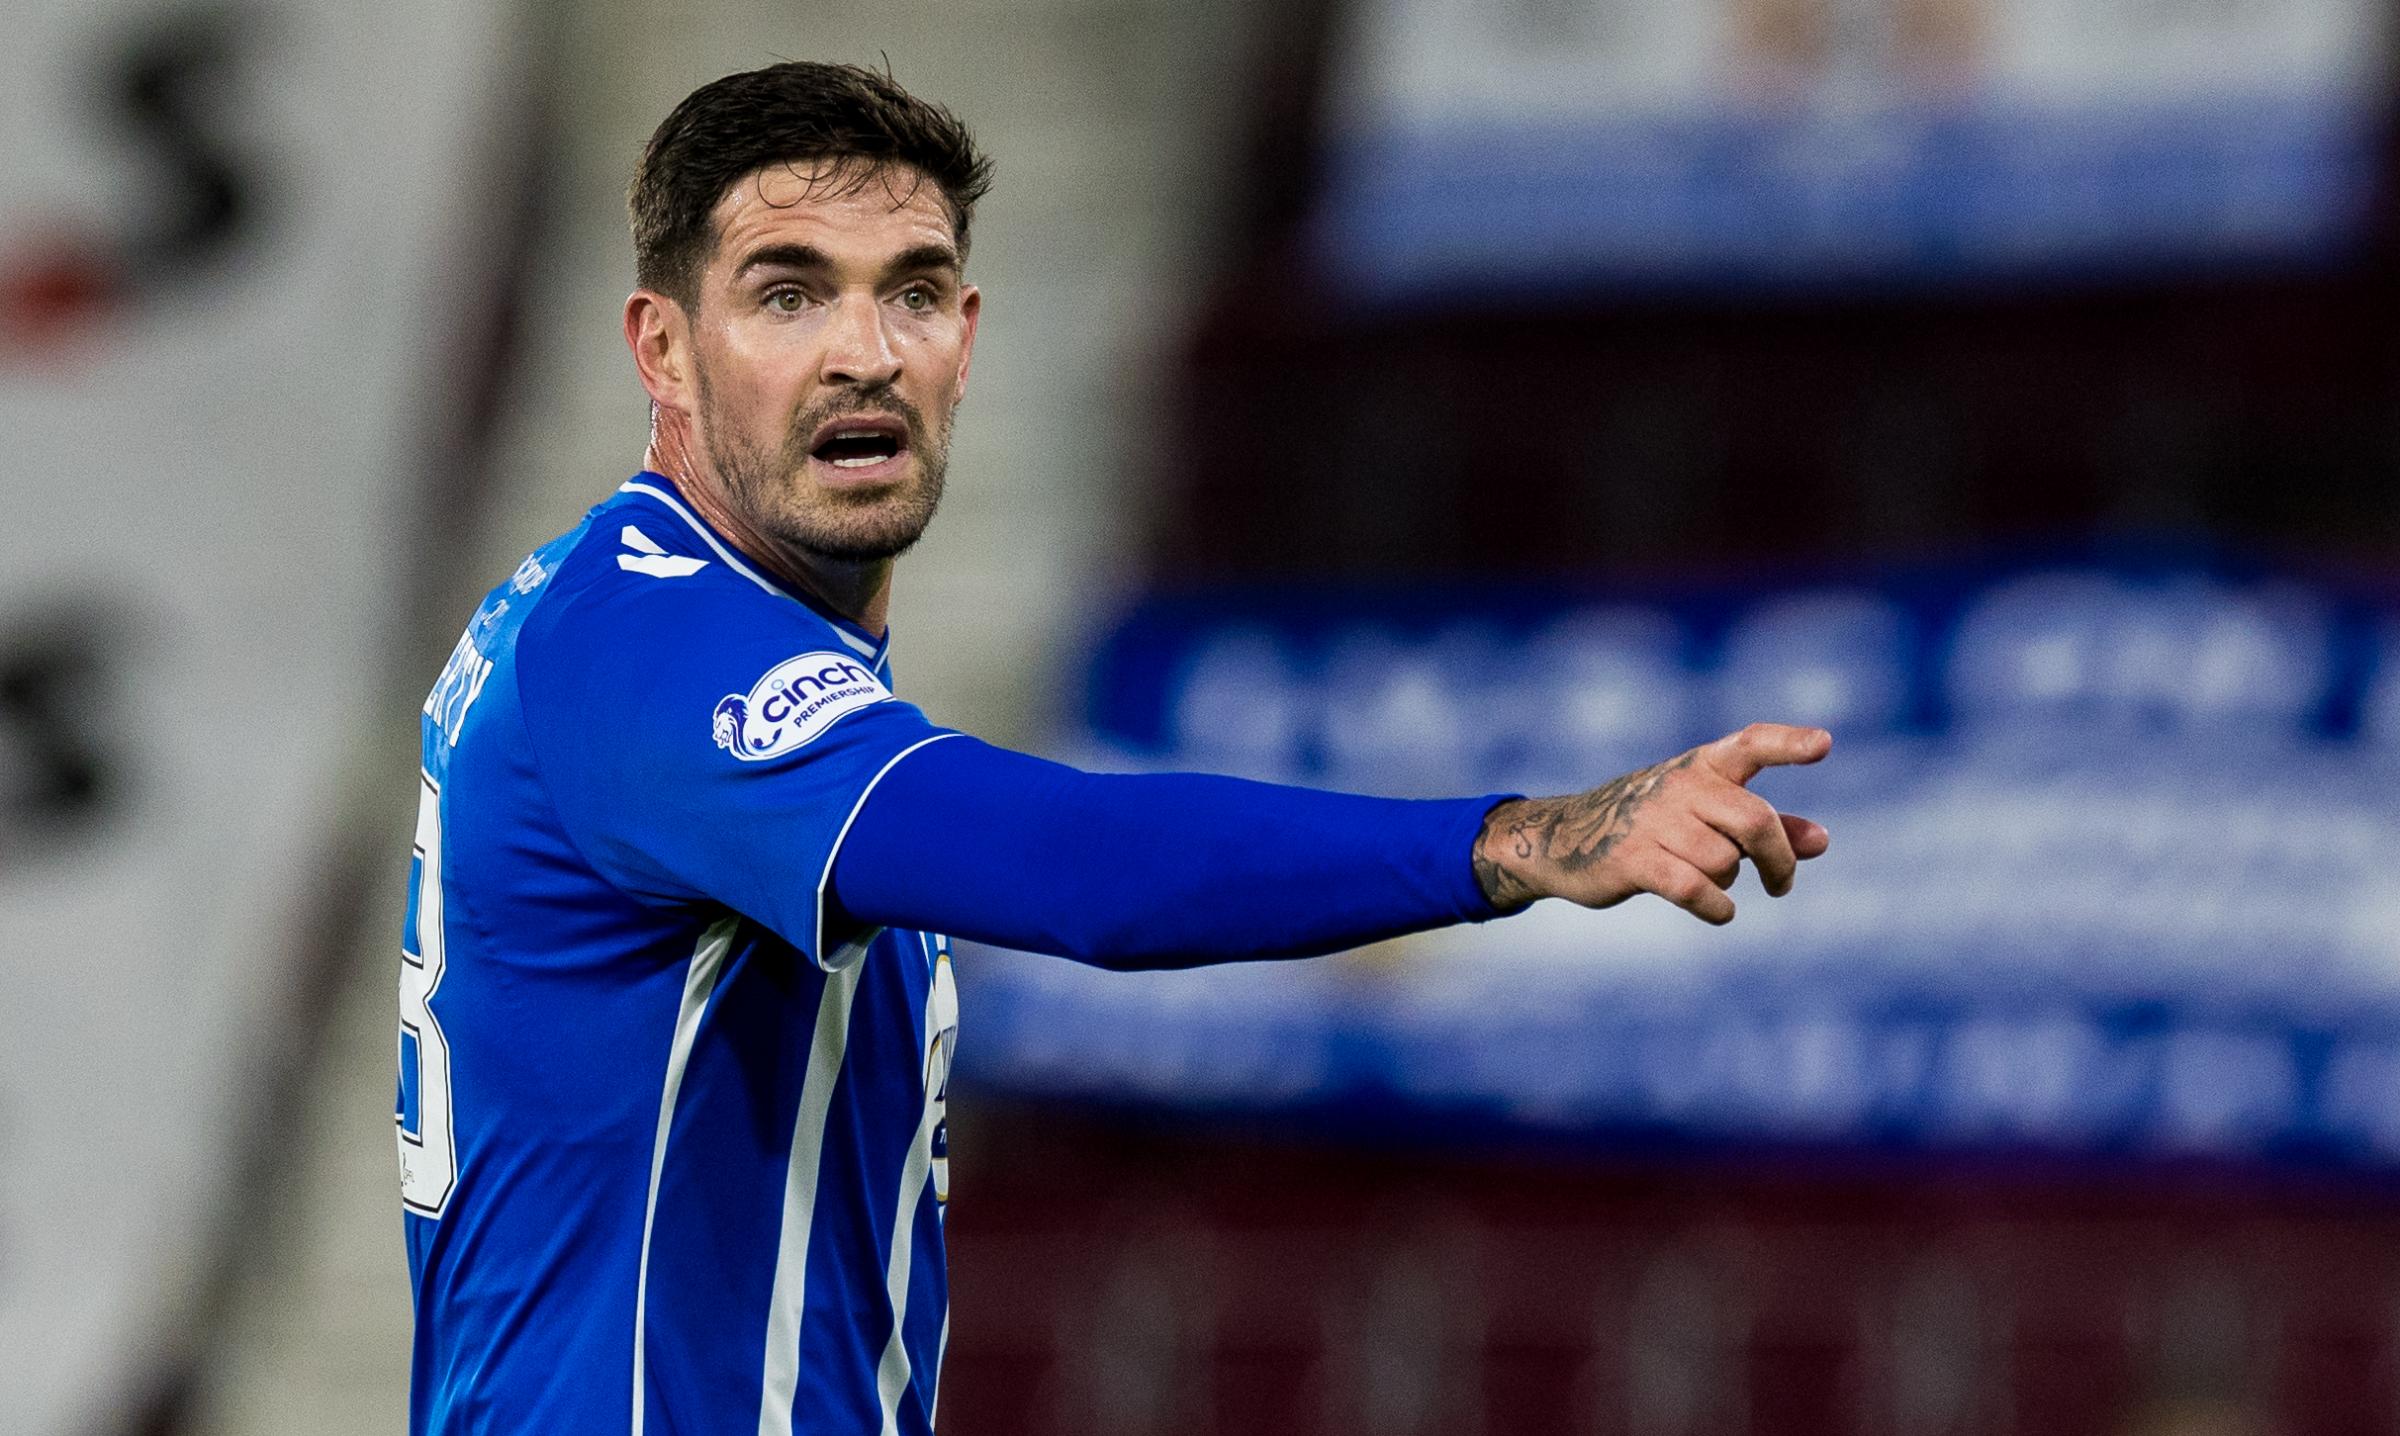 Kyle Lafferty admits sectarian comment as Kilmarnock issue 'substantial fine' and engage Nil By Mouth